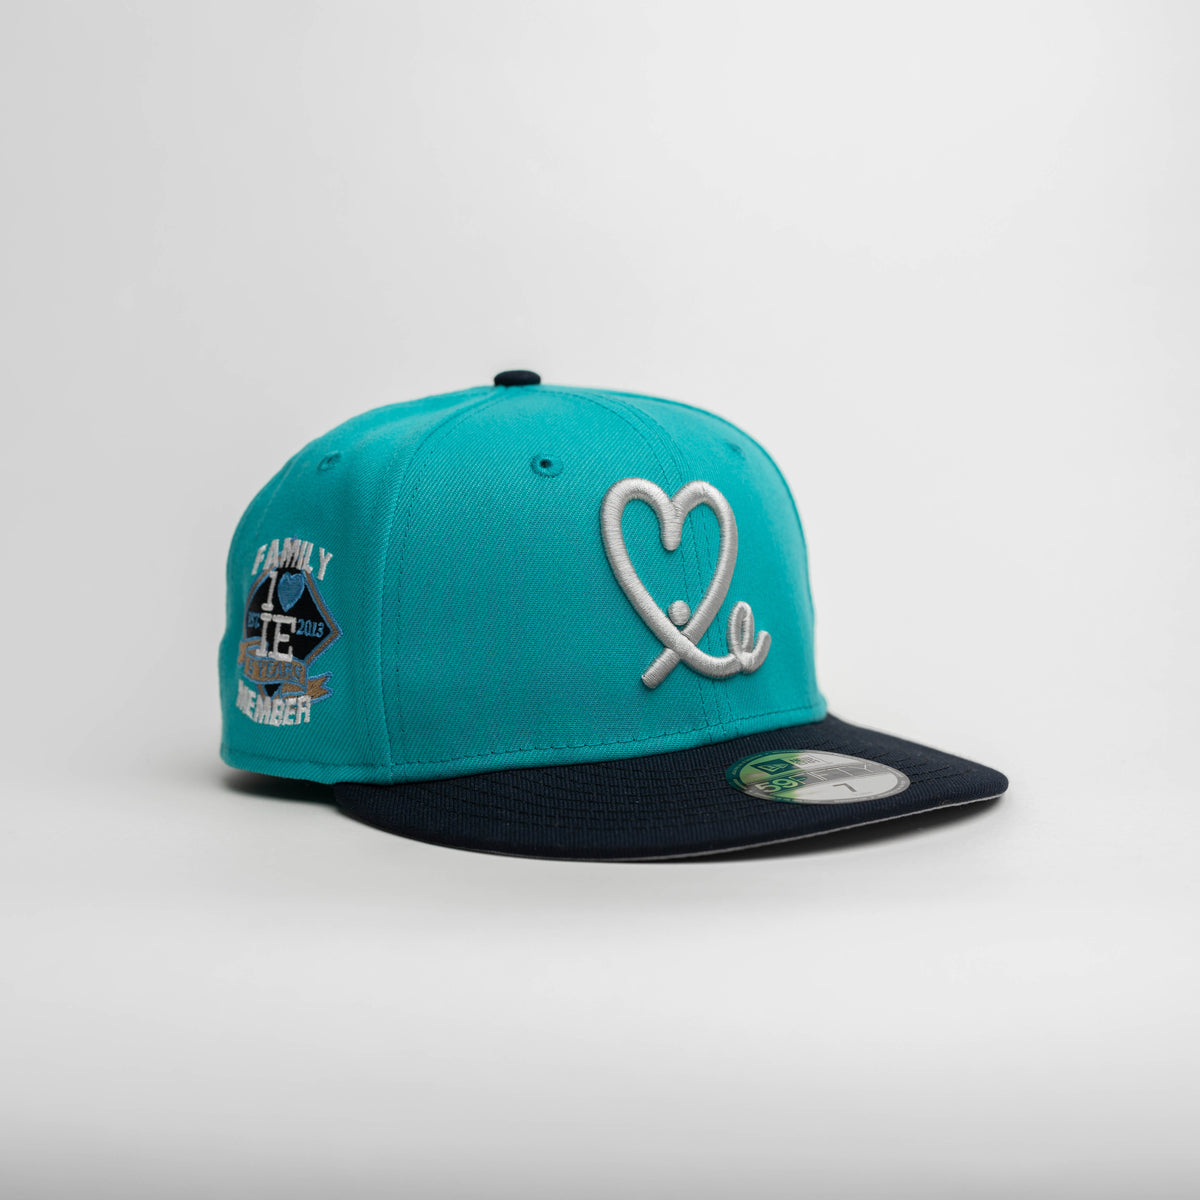 Limited Navy / Teal / Orange 1LoveIE New Era 59FIFTY Fitted Cap